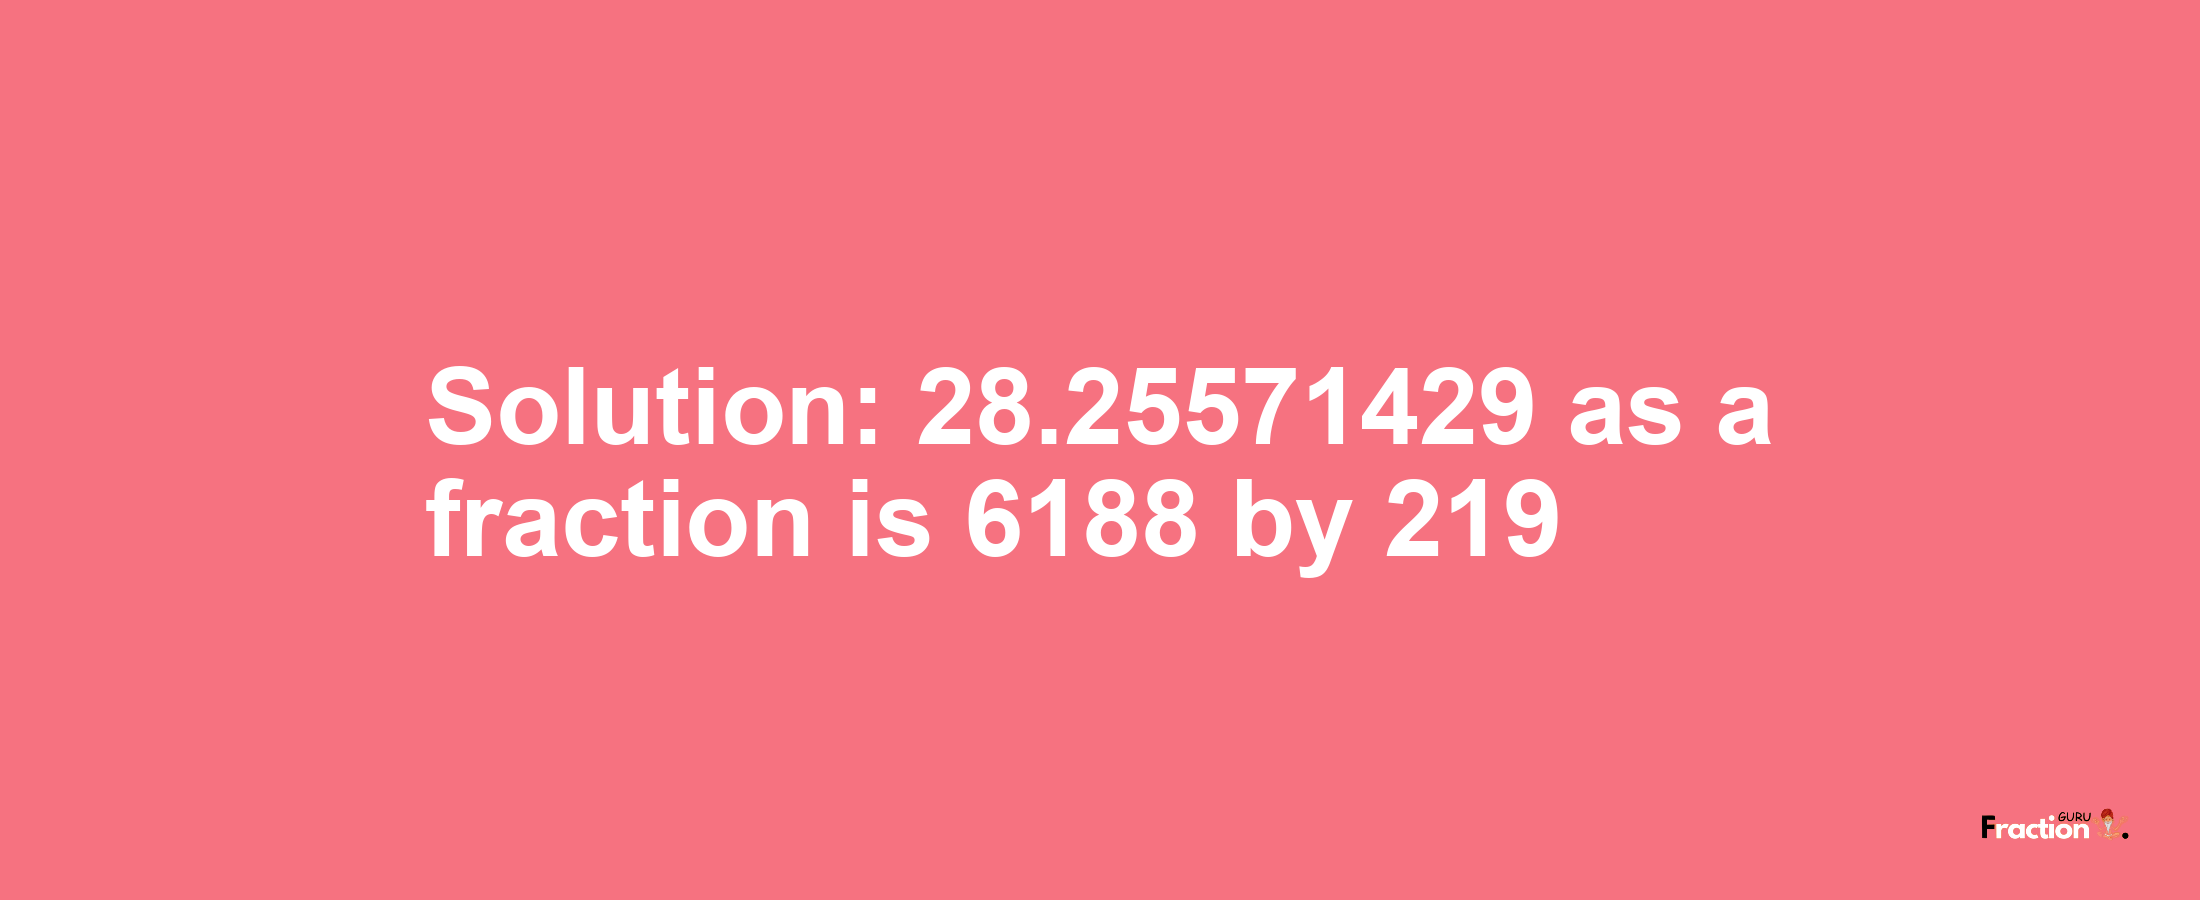 Solution:28.25571429 as a fraction is 6188/219